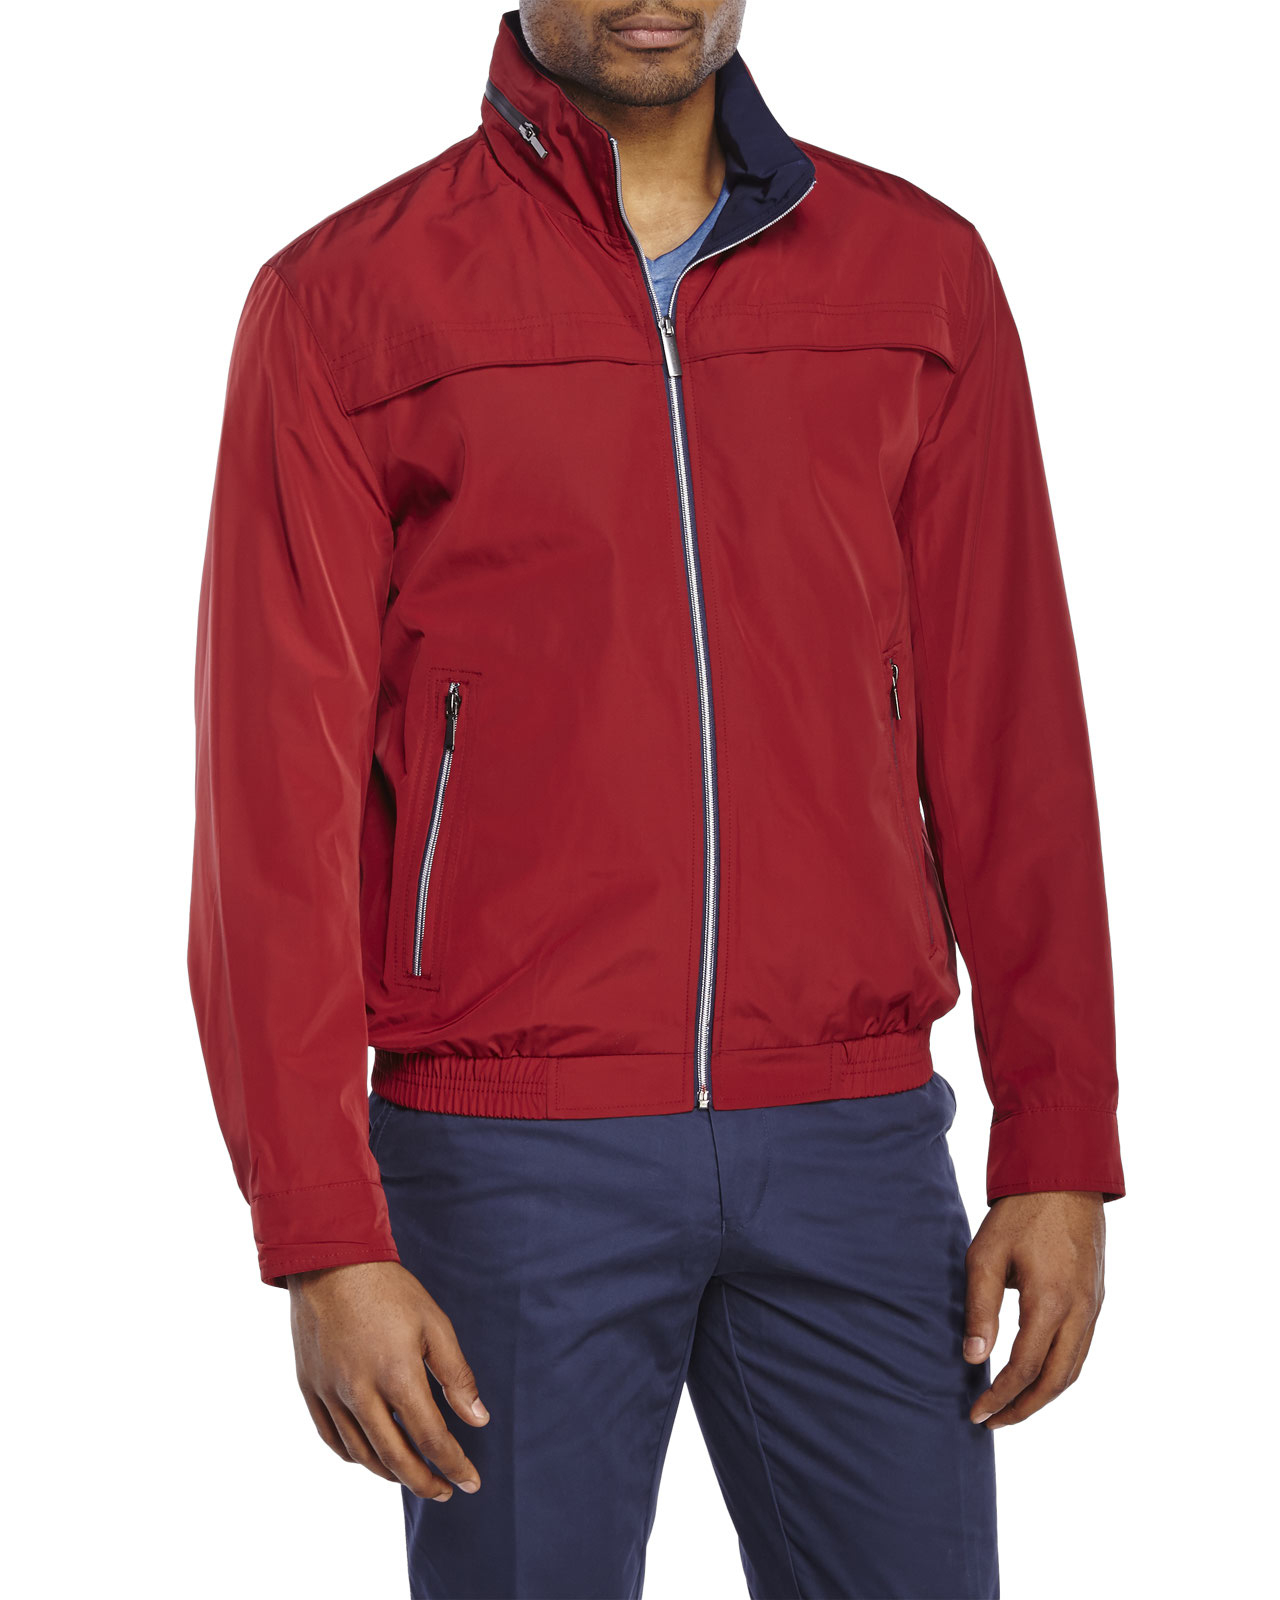 Lyst - London Fog Cire Packable Jacket in Red for Men